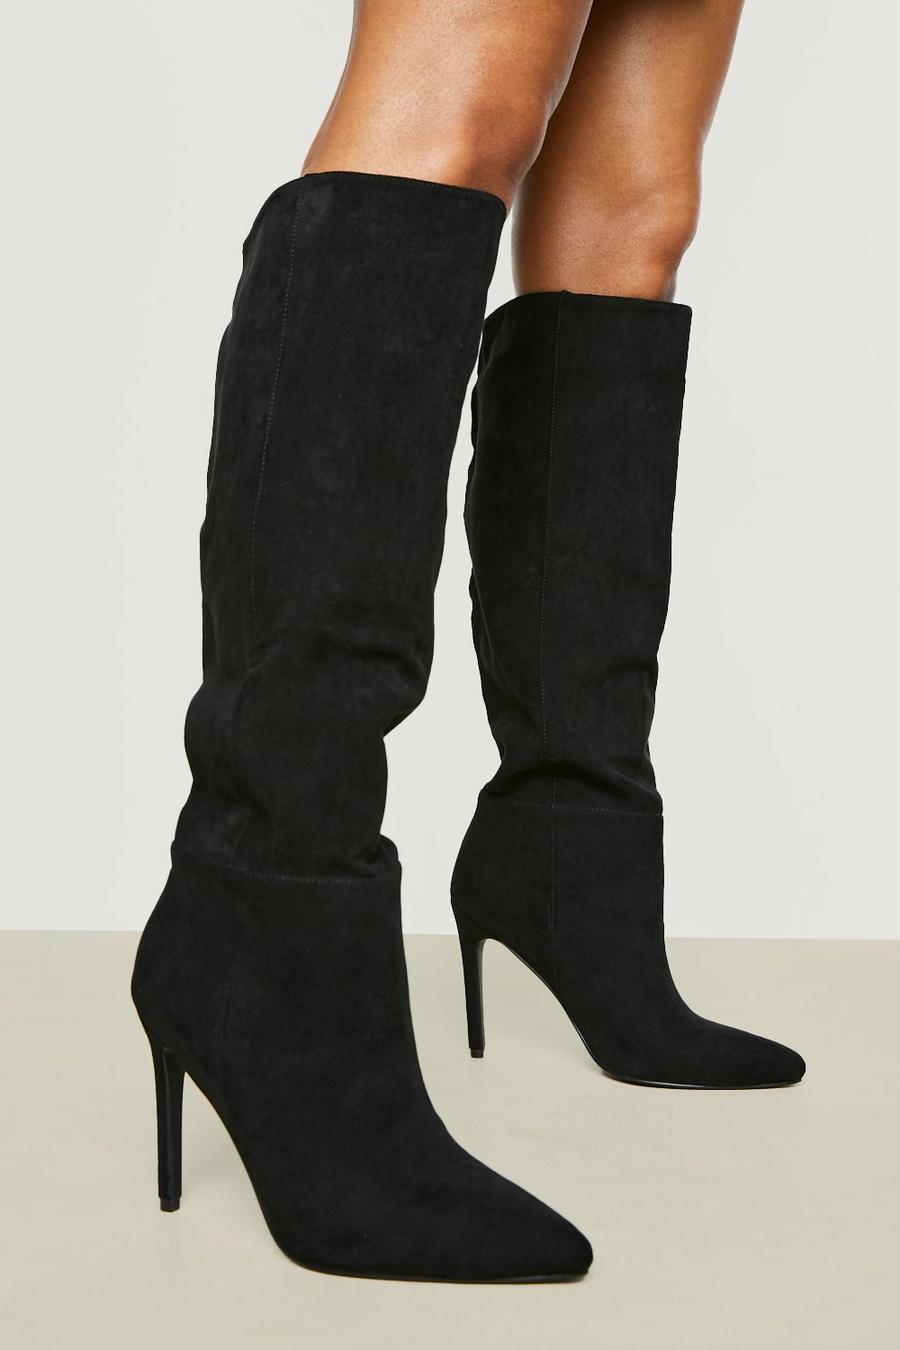 Black negro Pointed Knee High Stiletto Heeled Boots